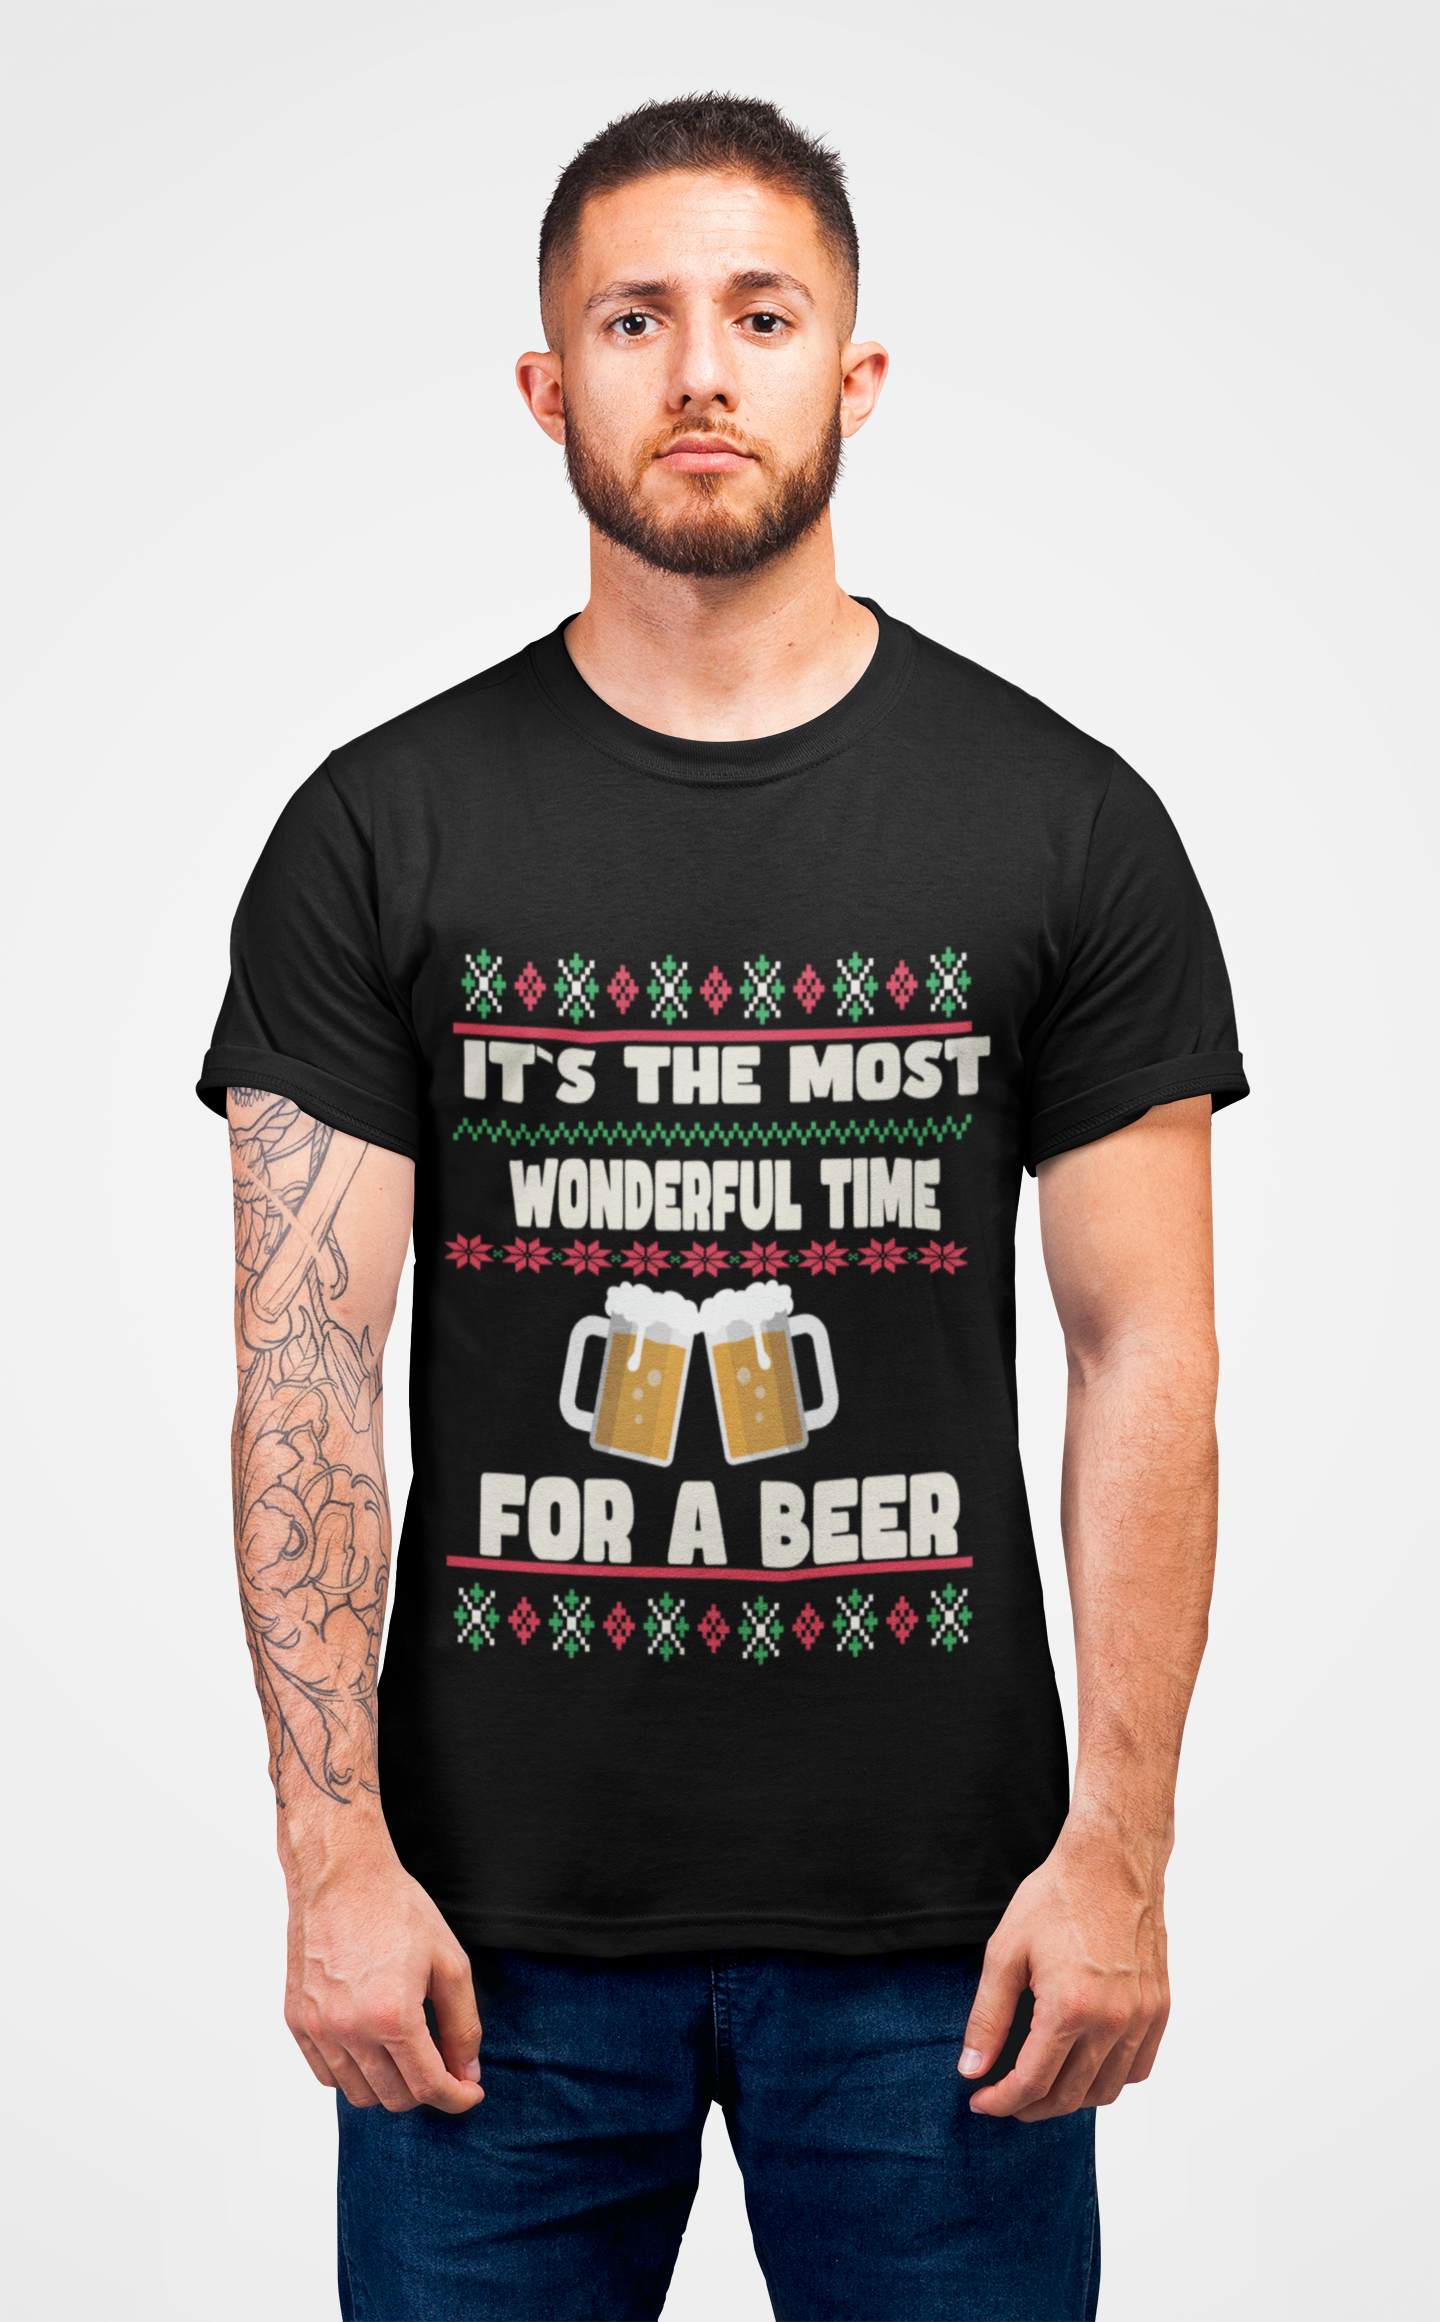 "Its the most wonderful time" T-Shirt